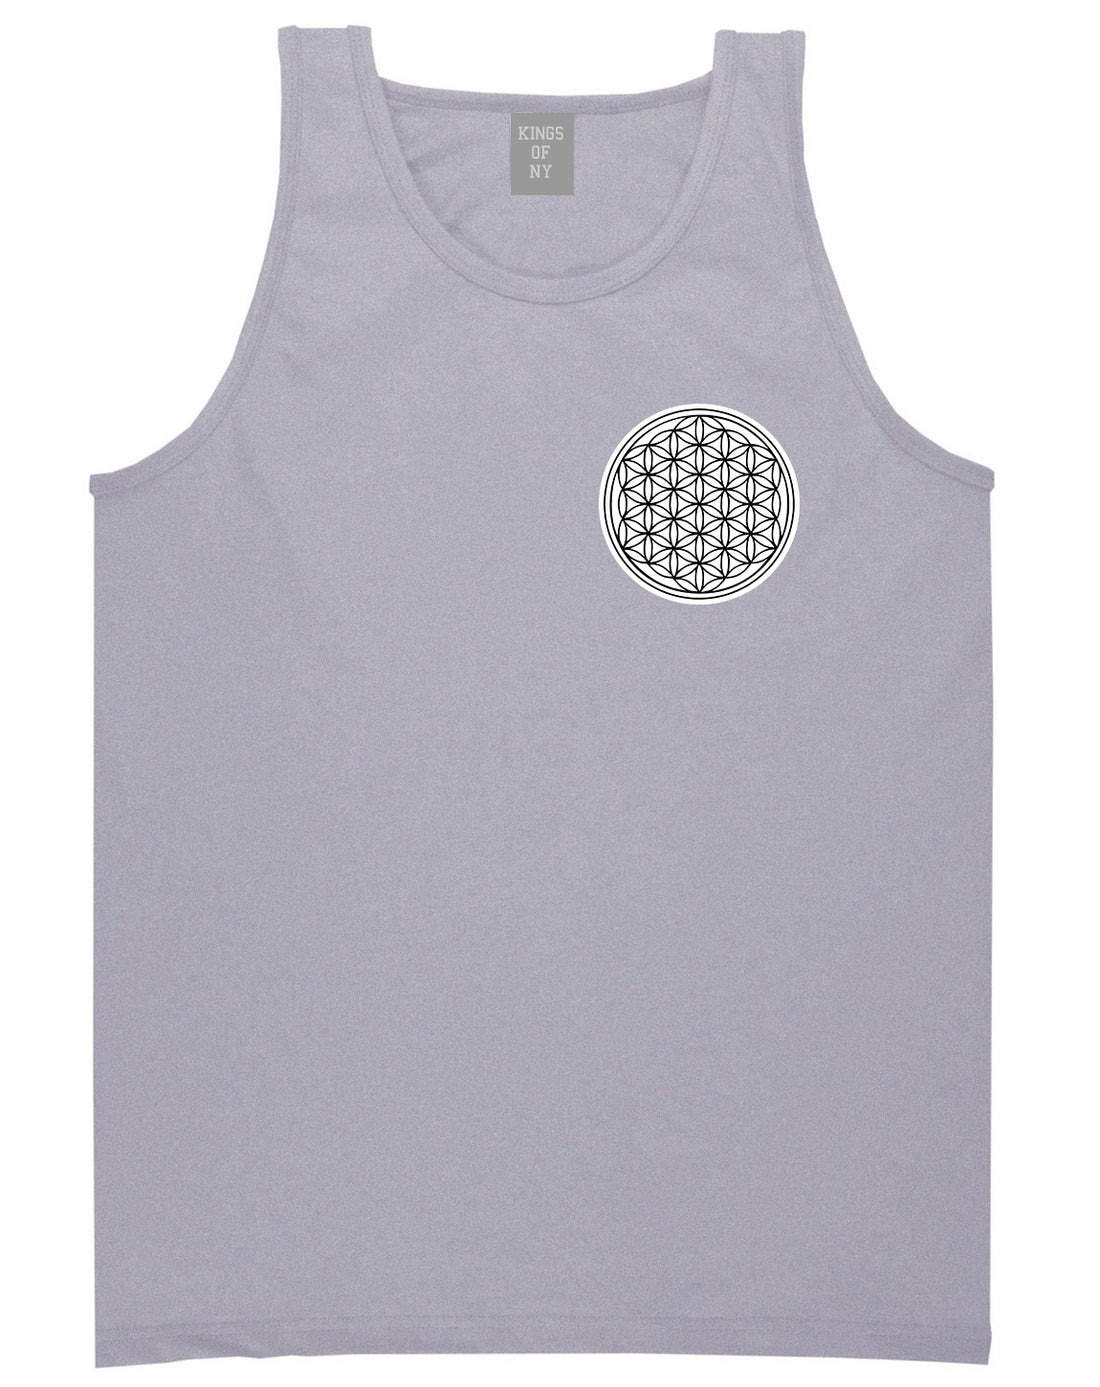 Flower Of Life Chest Mens Grey Tank Top Shirt by KINGS OF NY